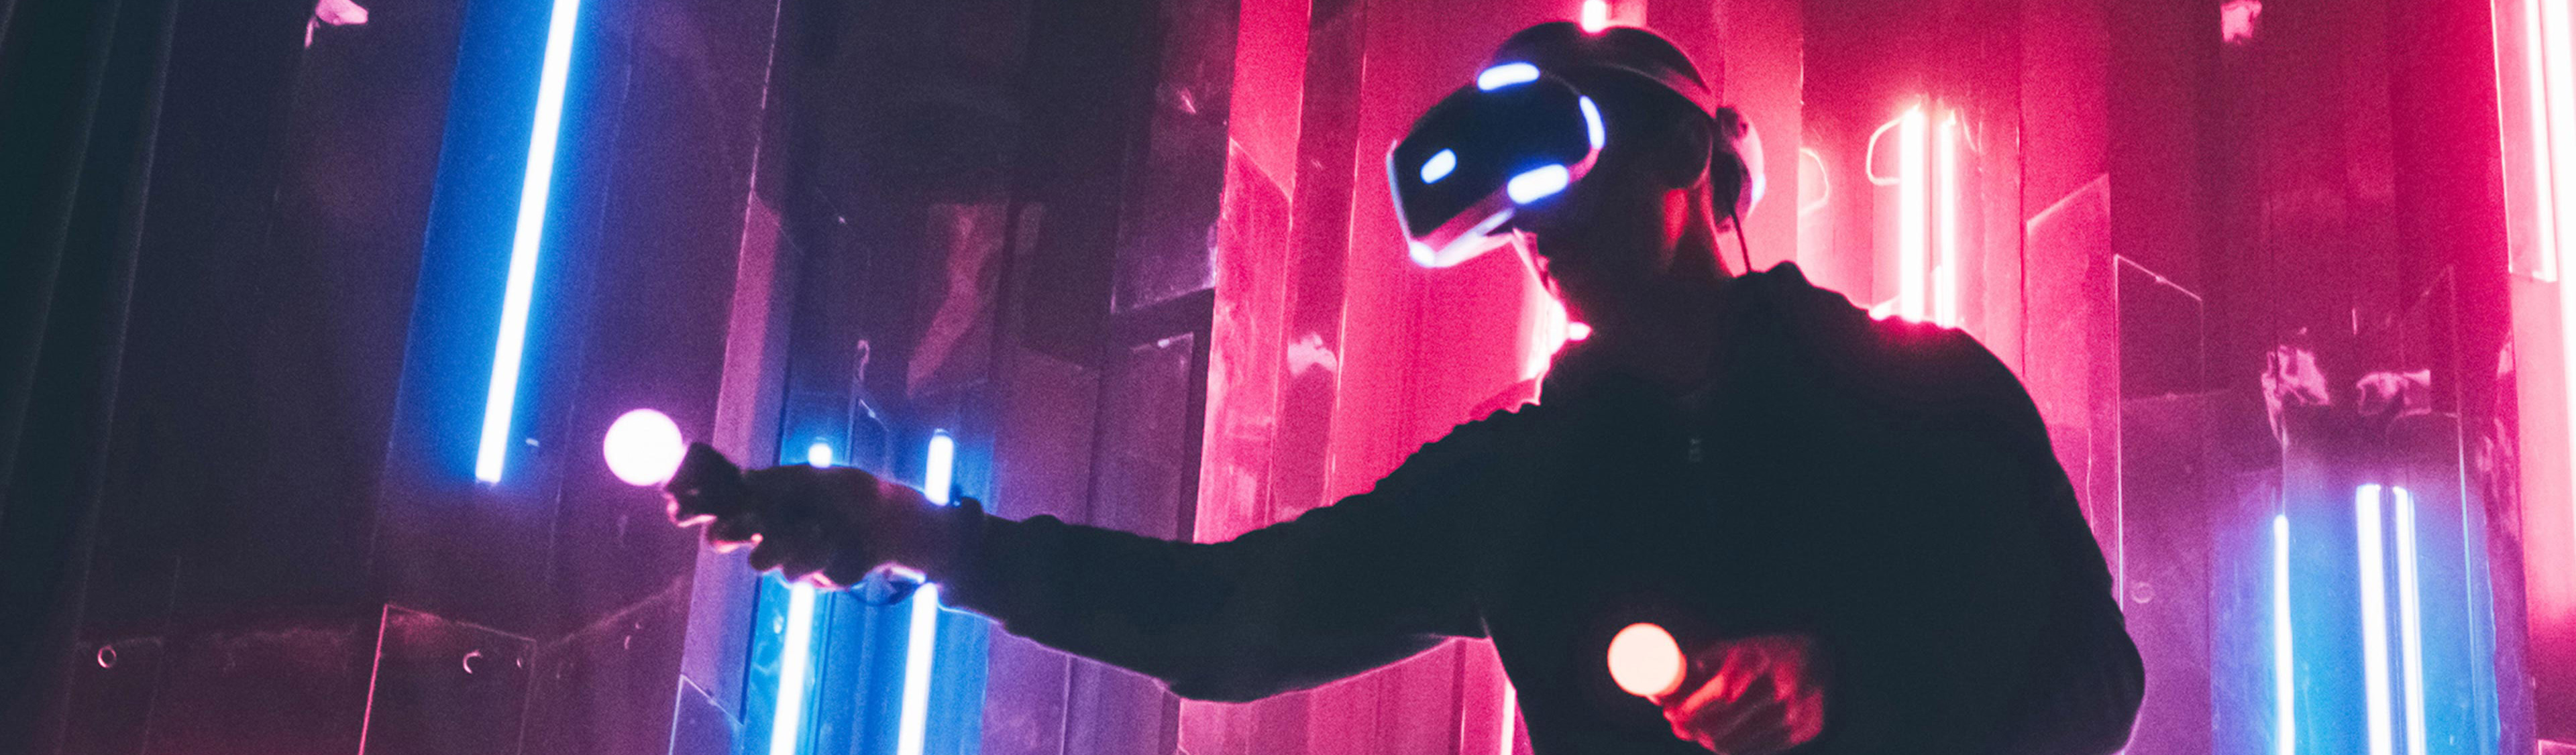 Man wearing VR headset in dark space with neon light lamps